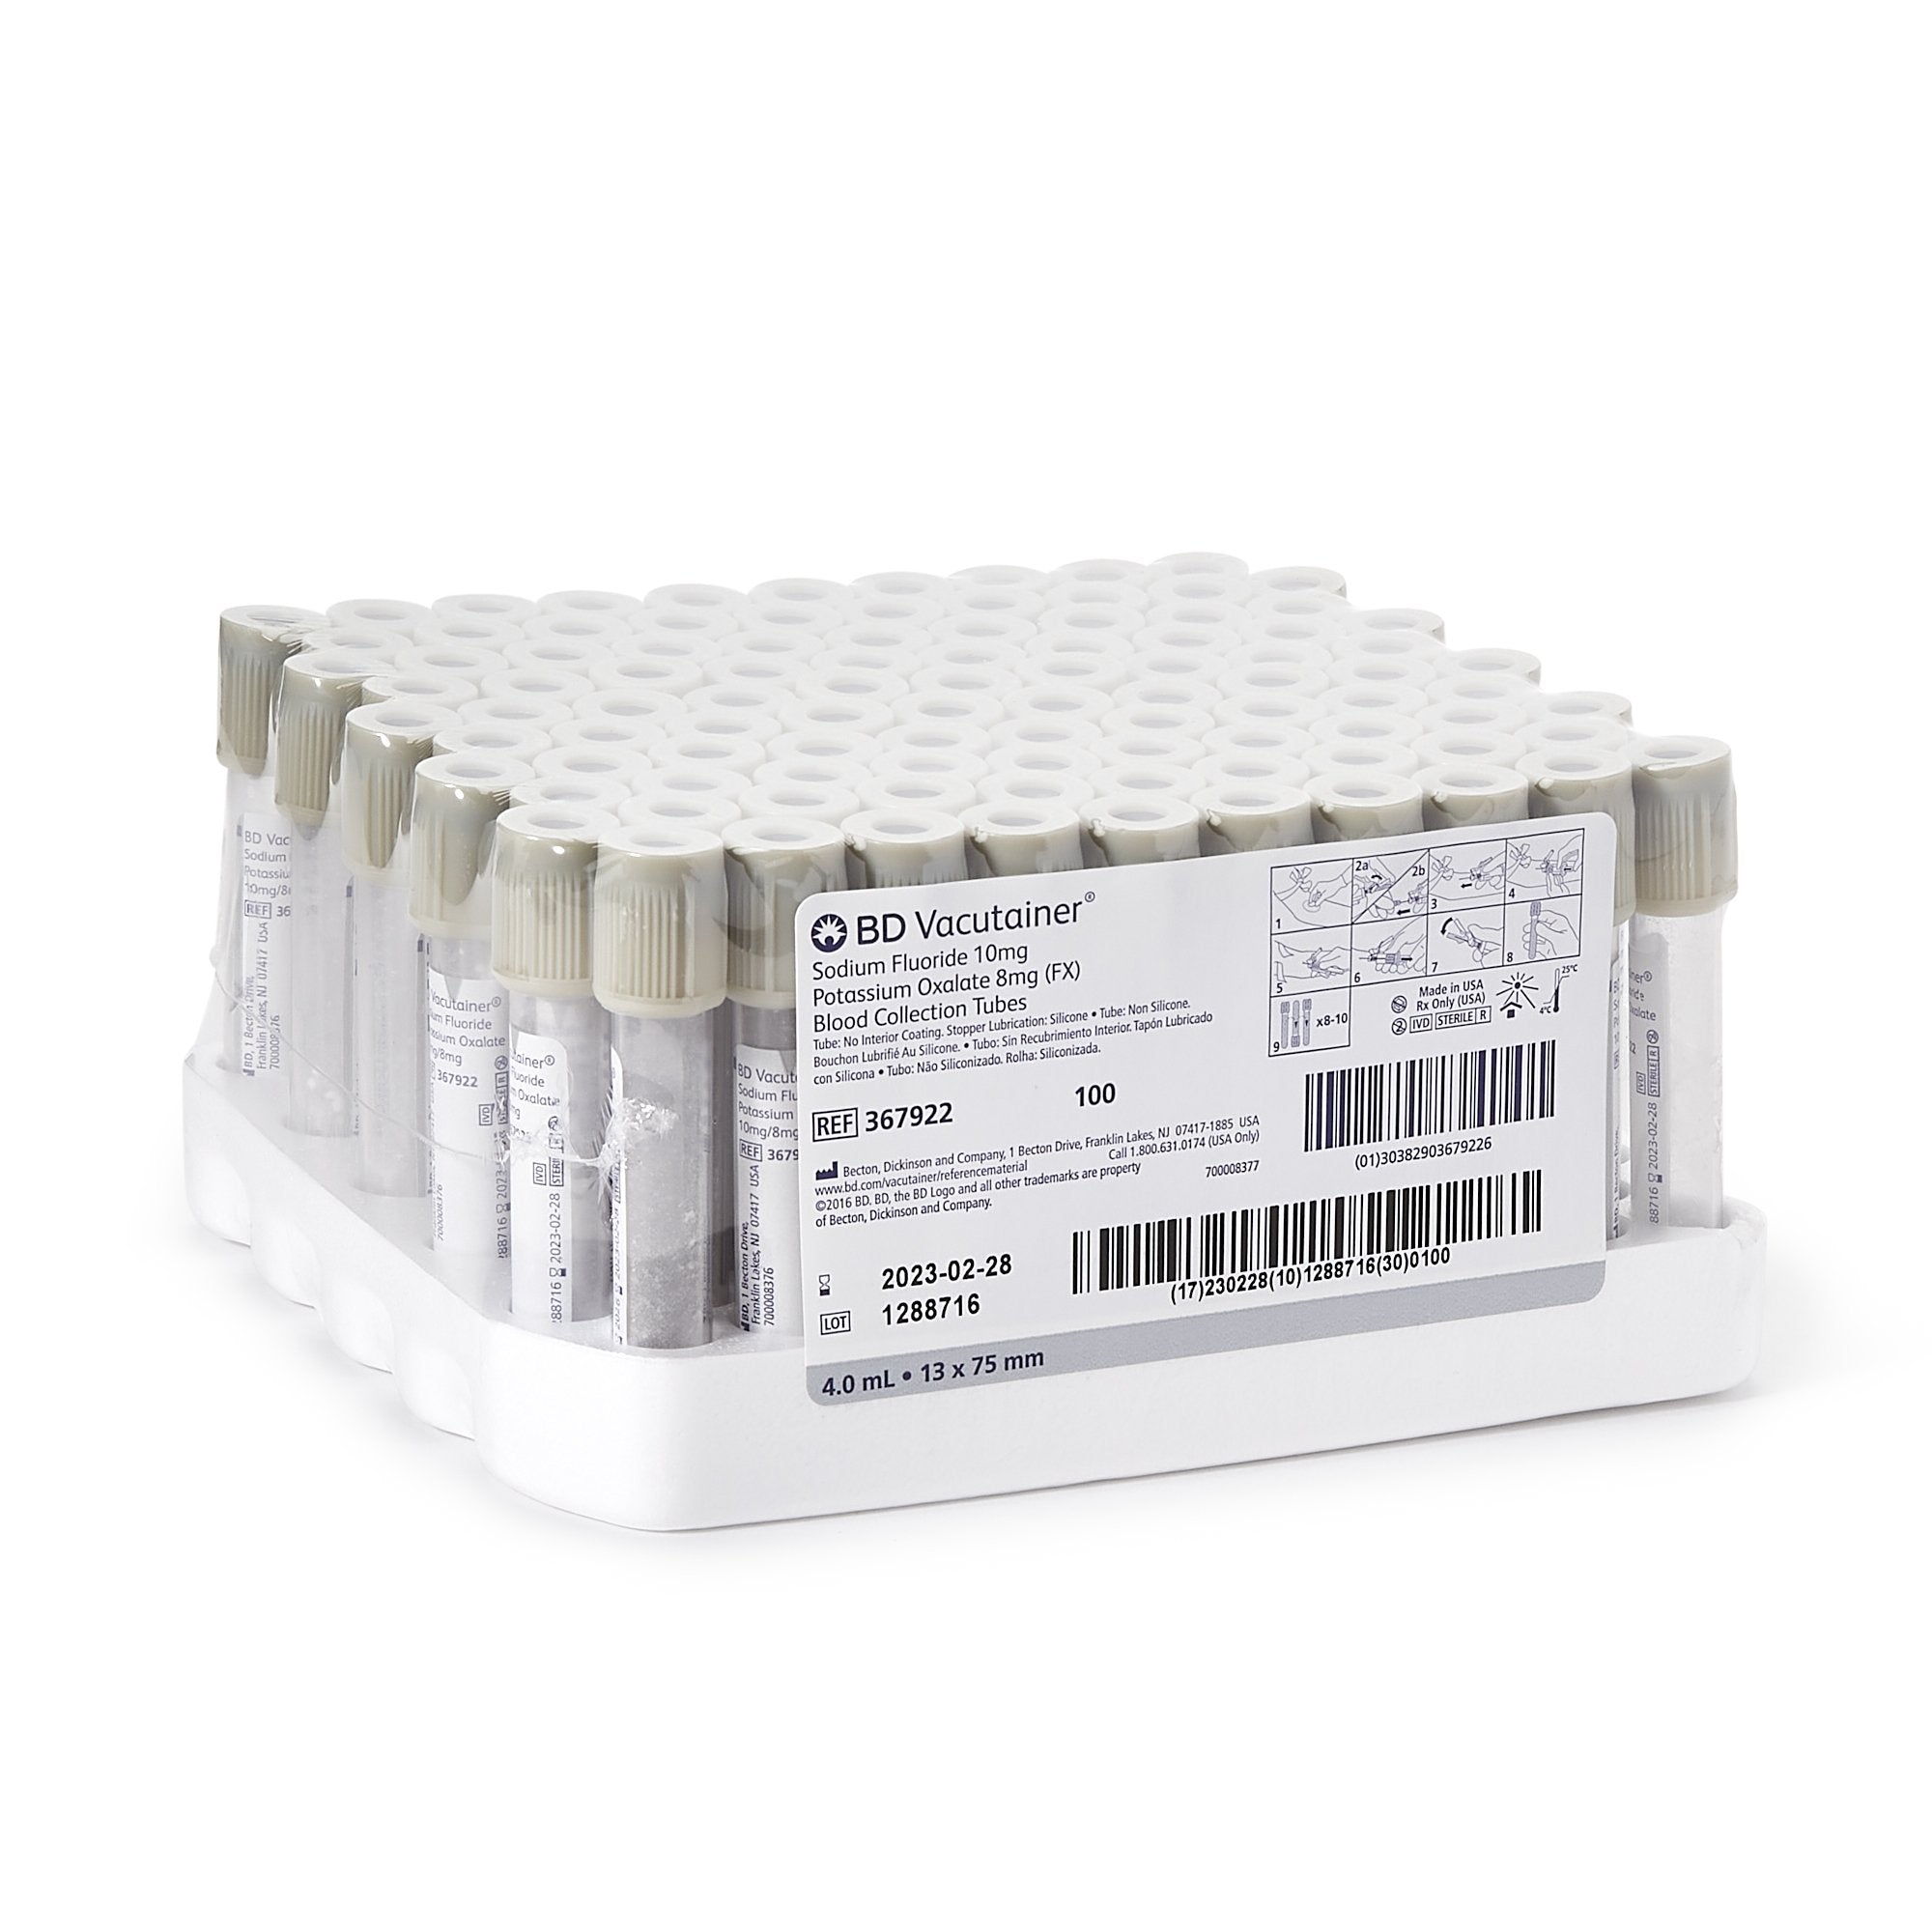 BD Vacutainer® Venous Blood Collection Plastic Tube with Sodium Fluoride / Potassium Oxalate Additive - 4 mL